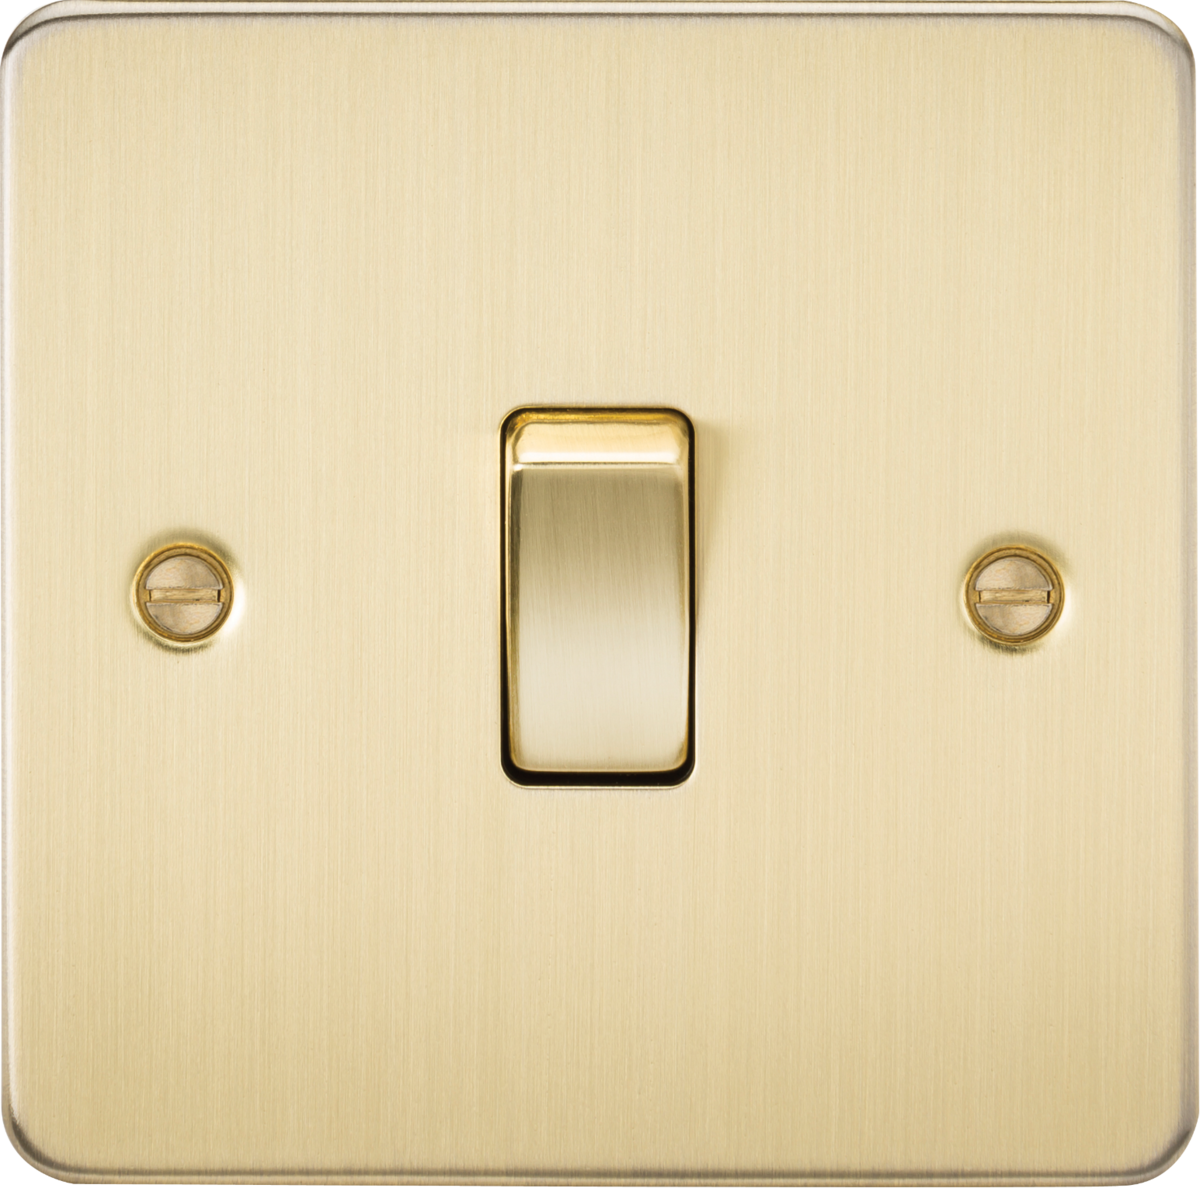 Brushed Brass - Flat Plate Switches and Sockets